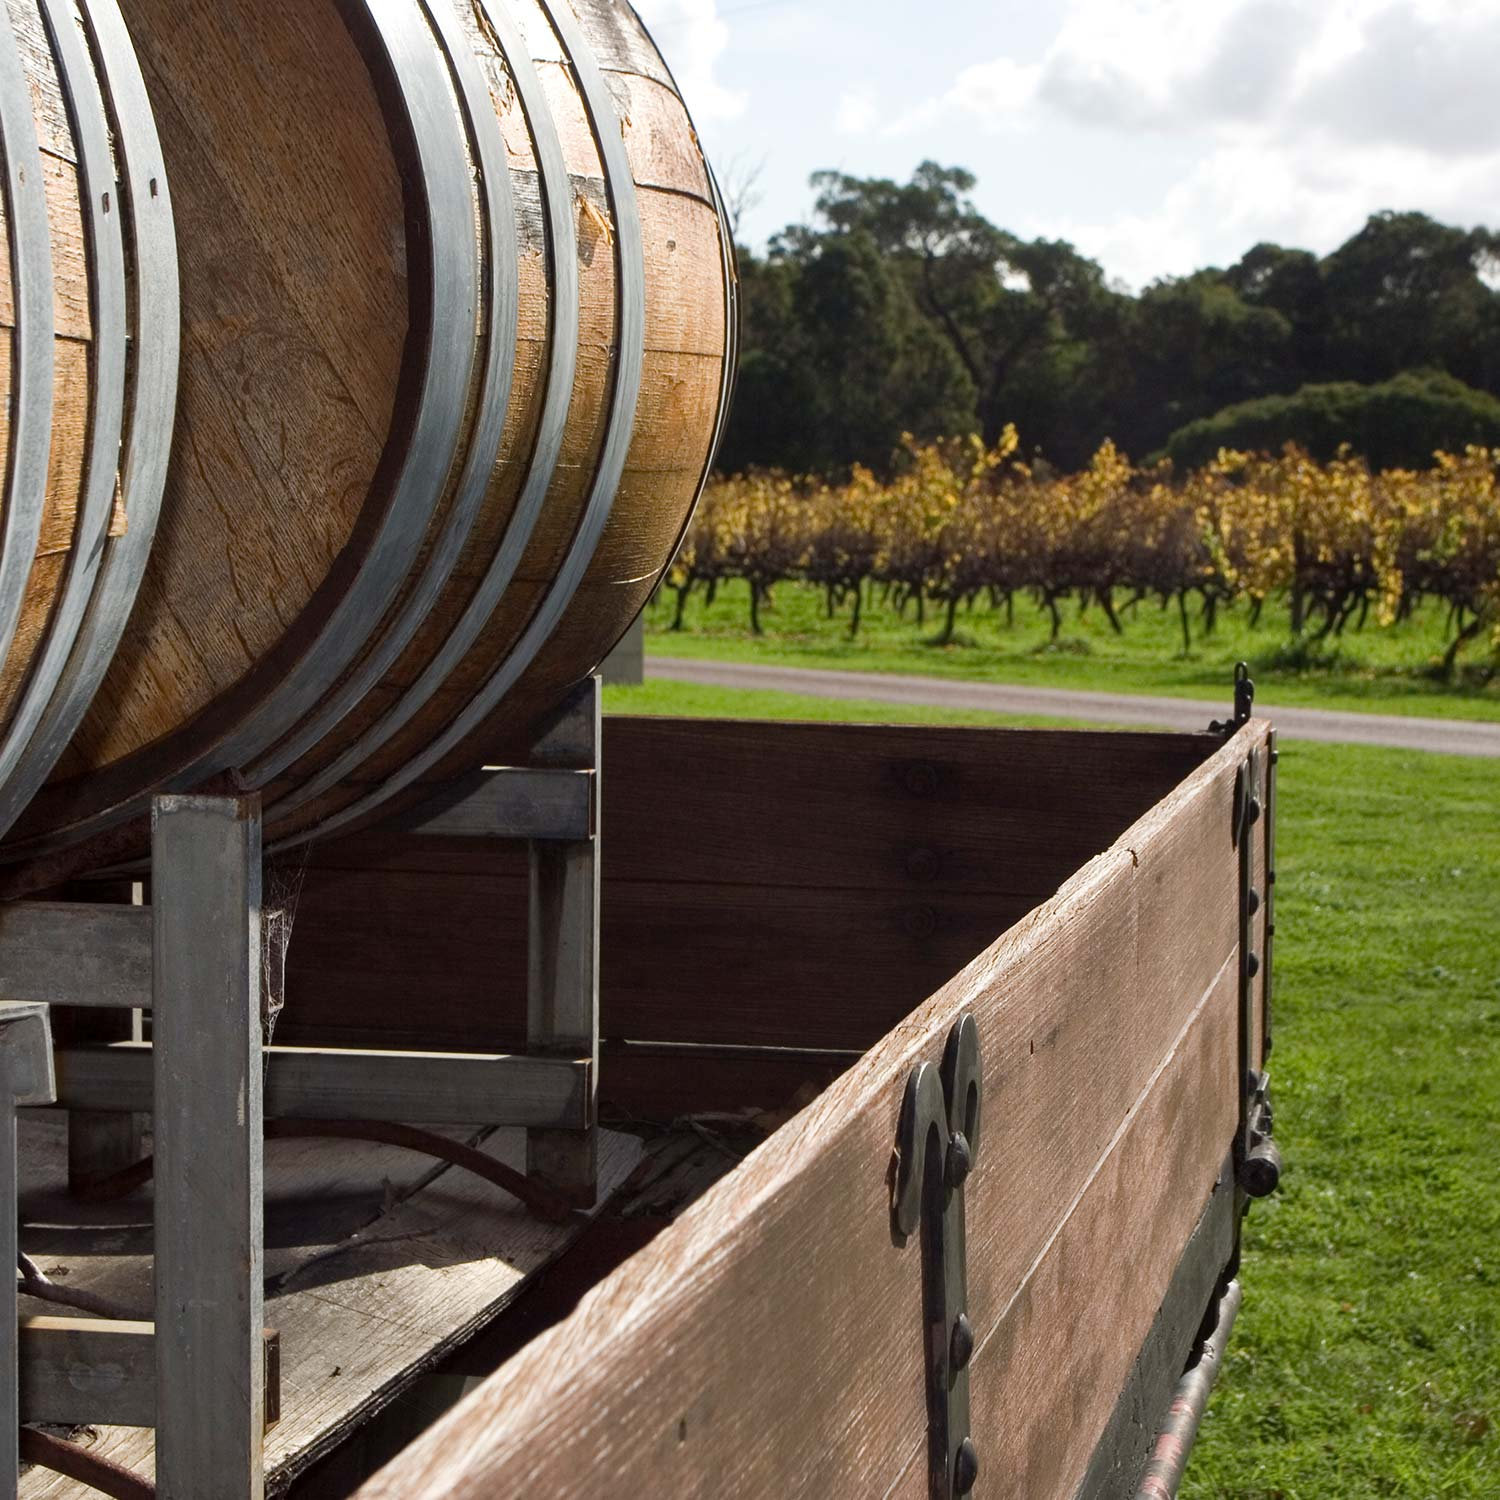 Victorian wineries are falling 'through another crack' as they battle to stay afloat